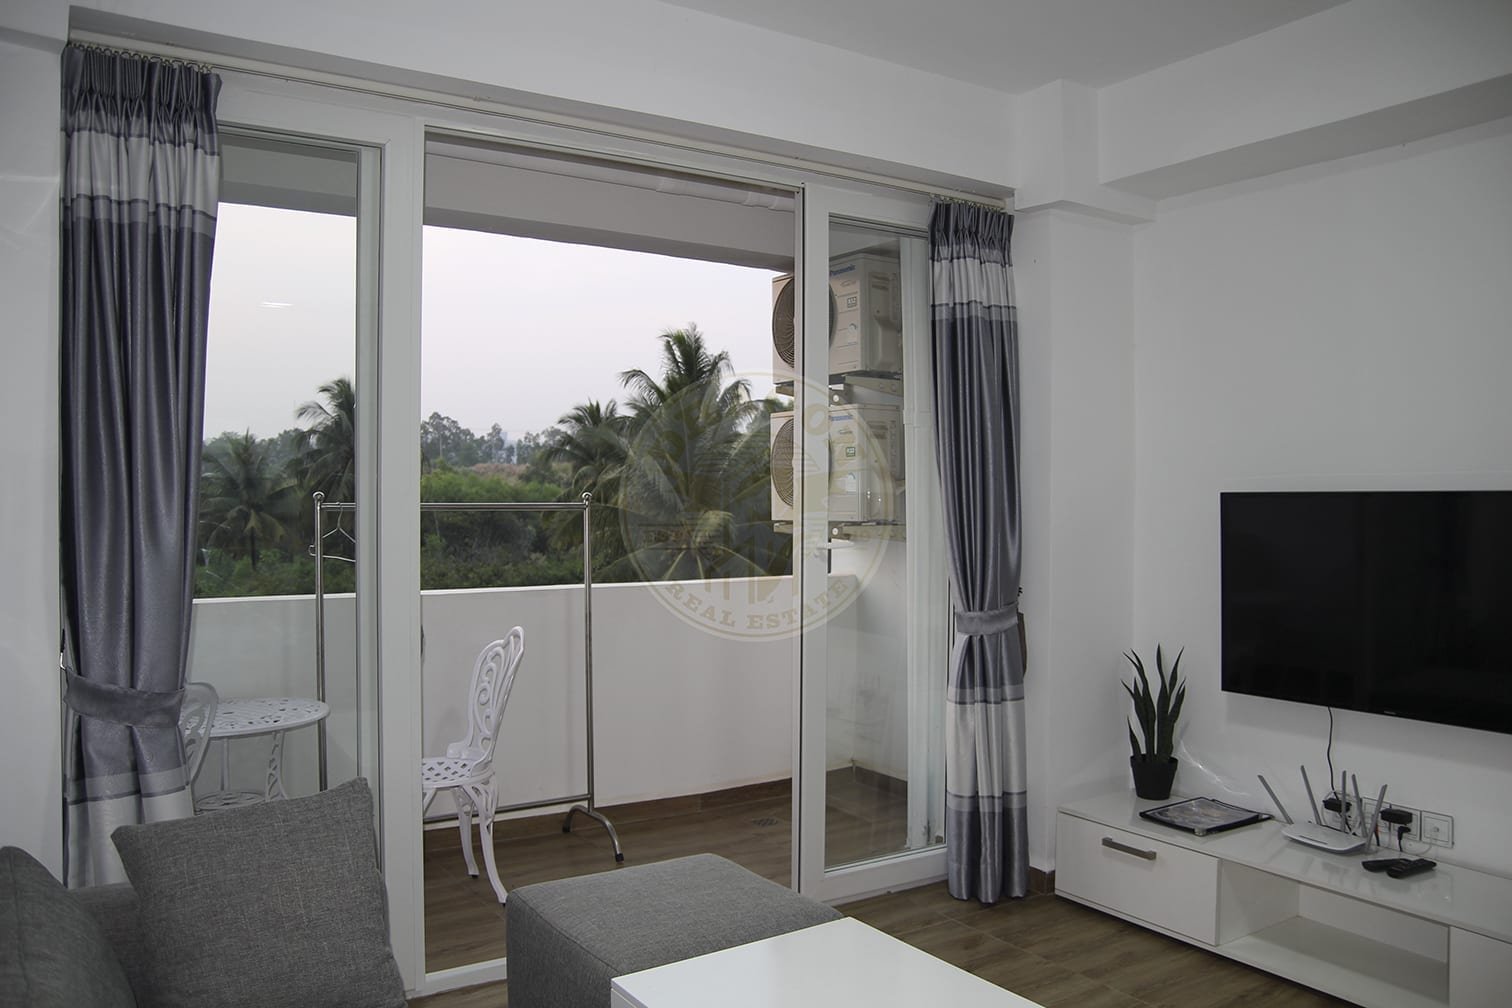 Location, Community, Quality Living Rent an Apartment in Sihanoukville. Real Estate in Sihanoukville